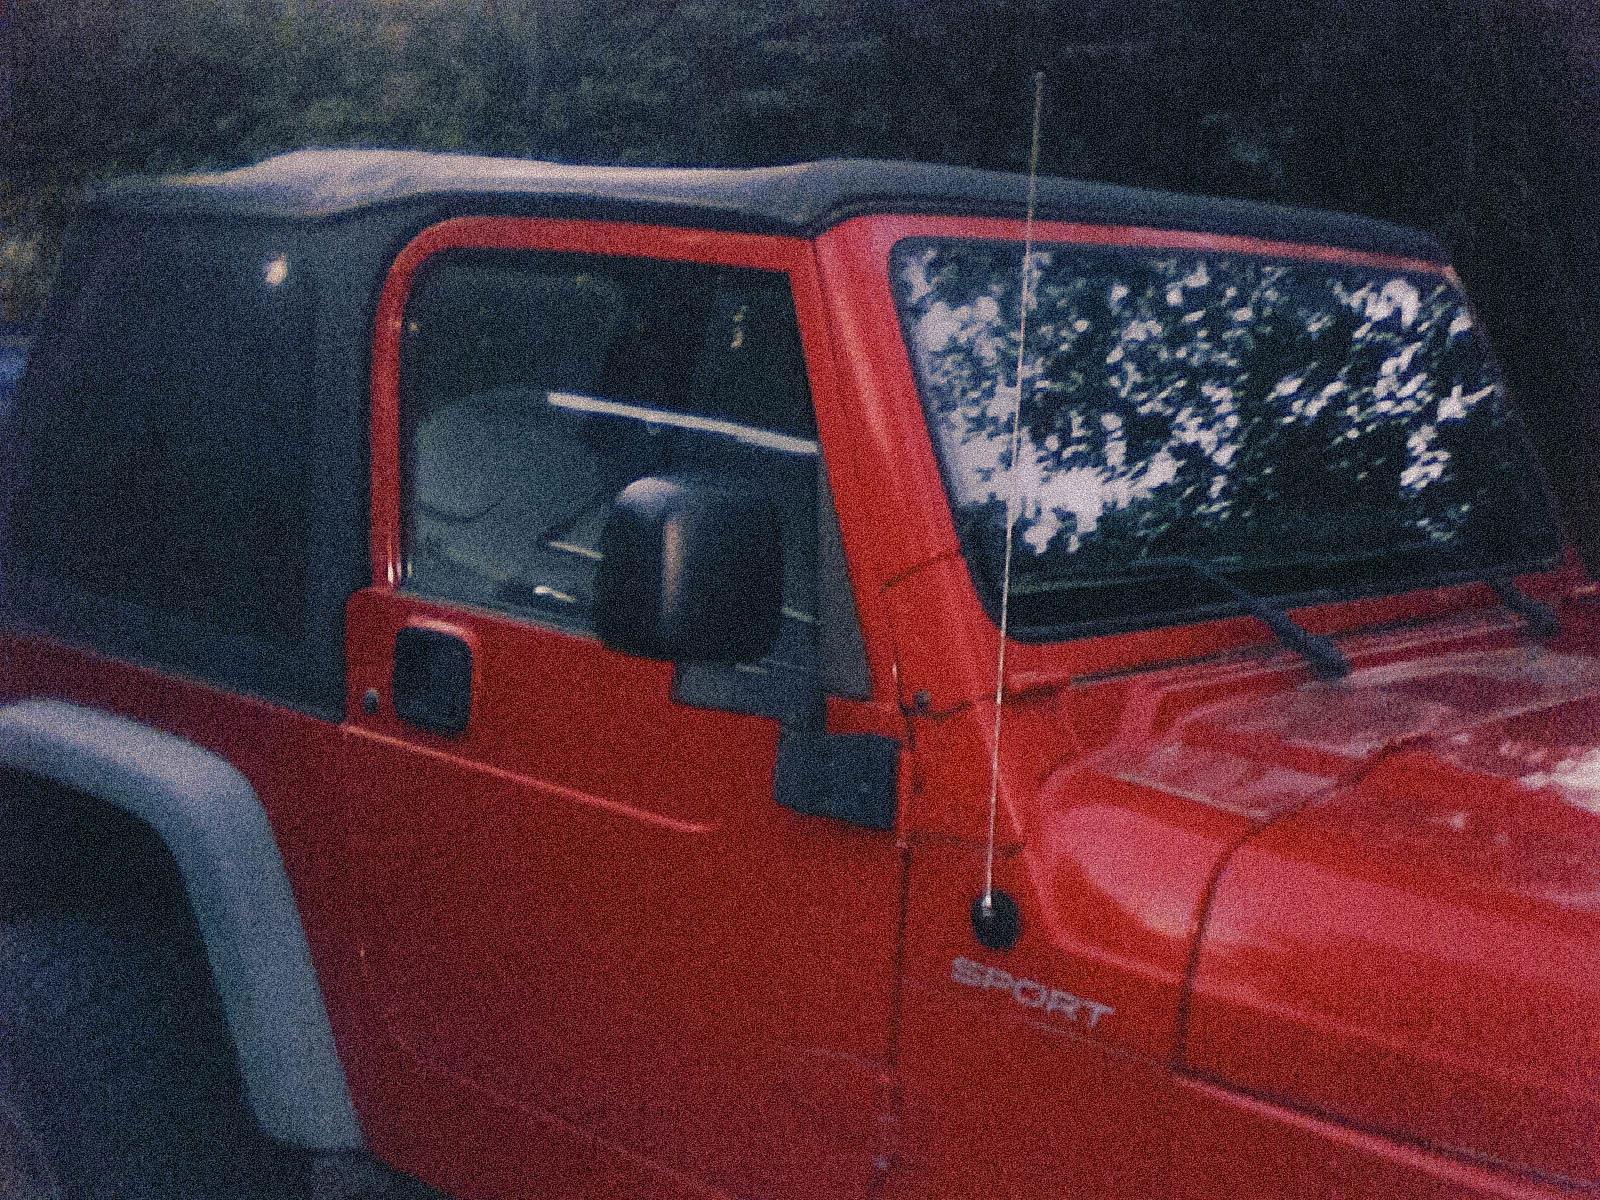 A red Jeep Wrangler Sport with a soft top, parked outdoors.